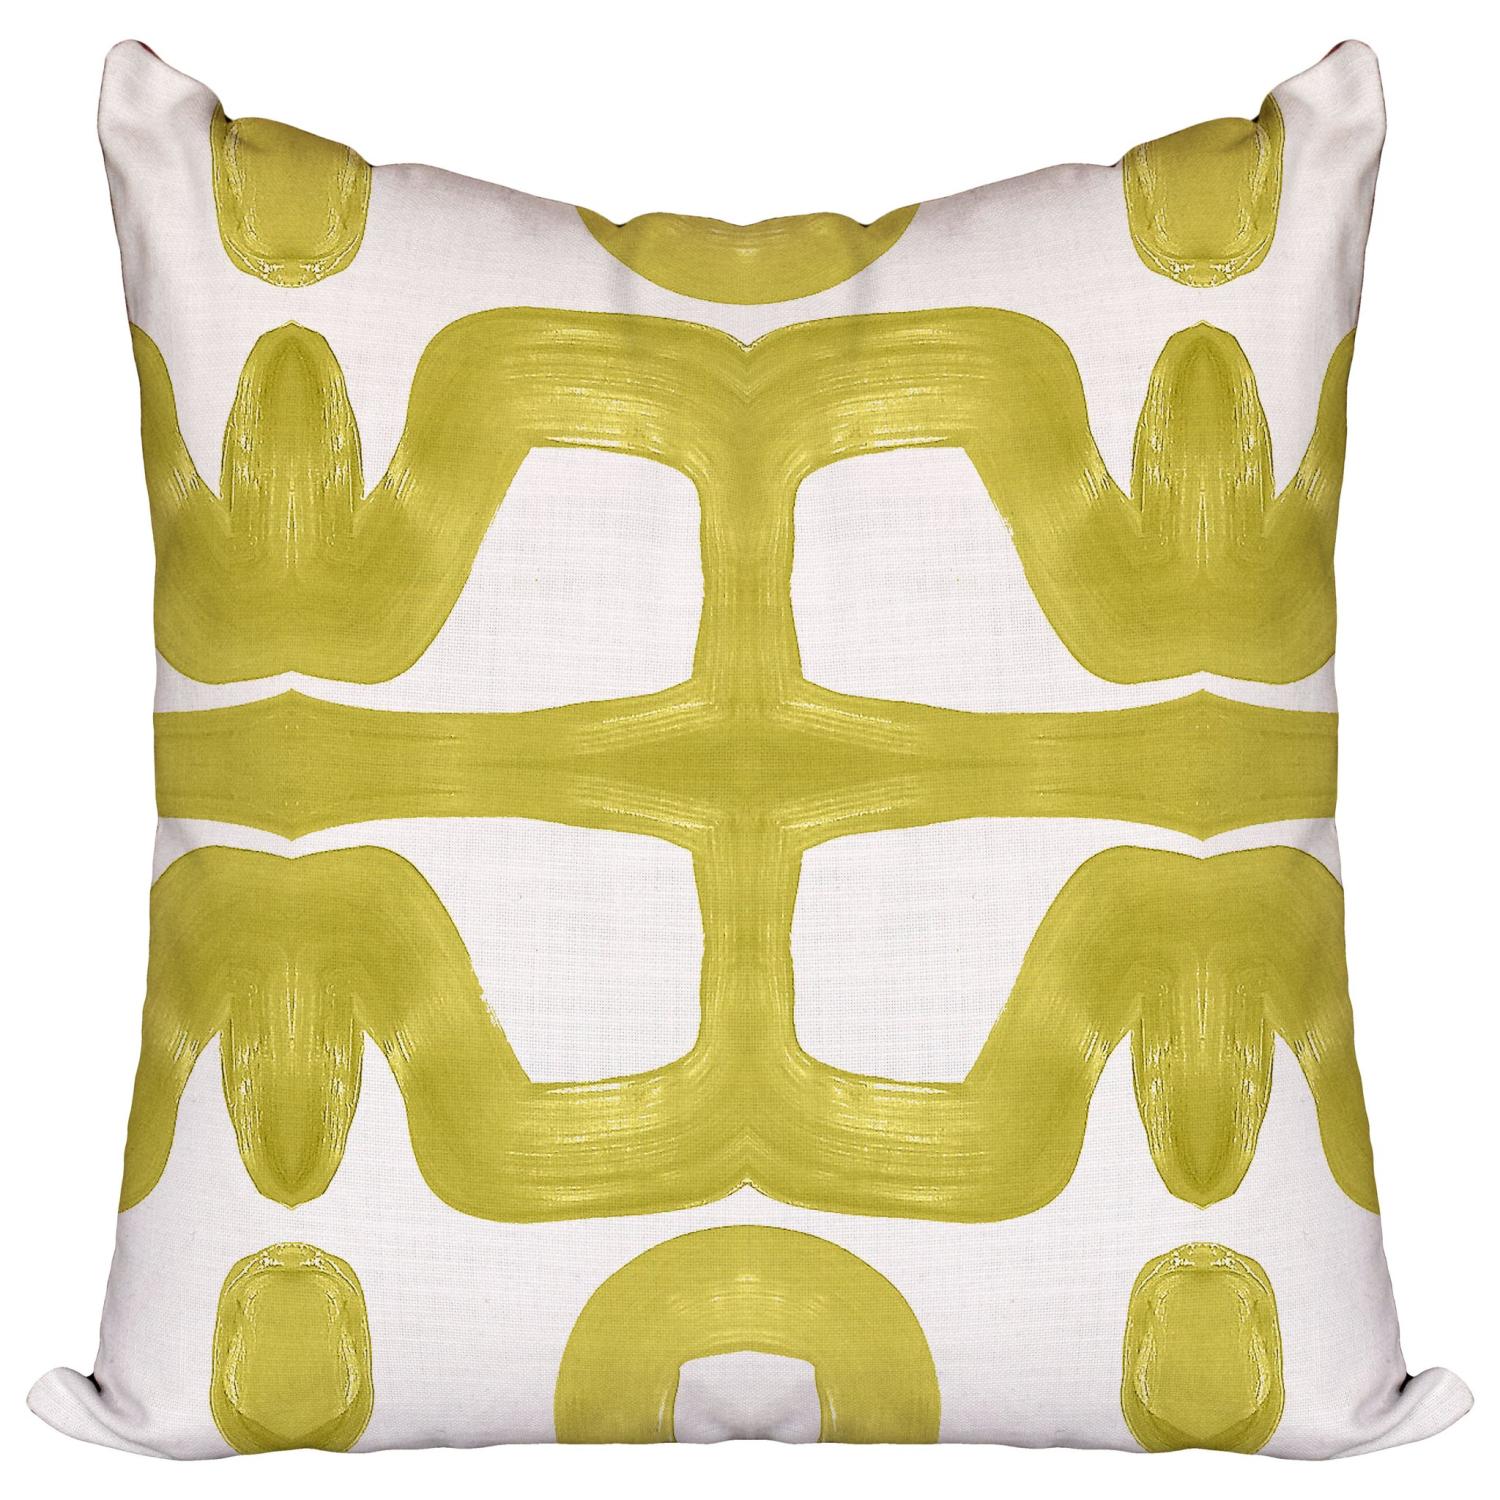 Candied Icing Pillow - Bamboo